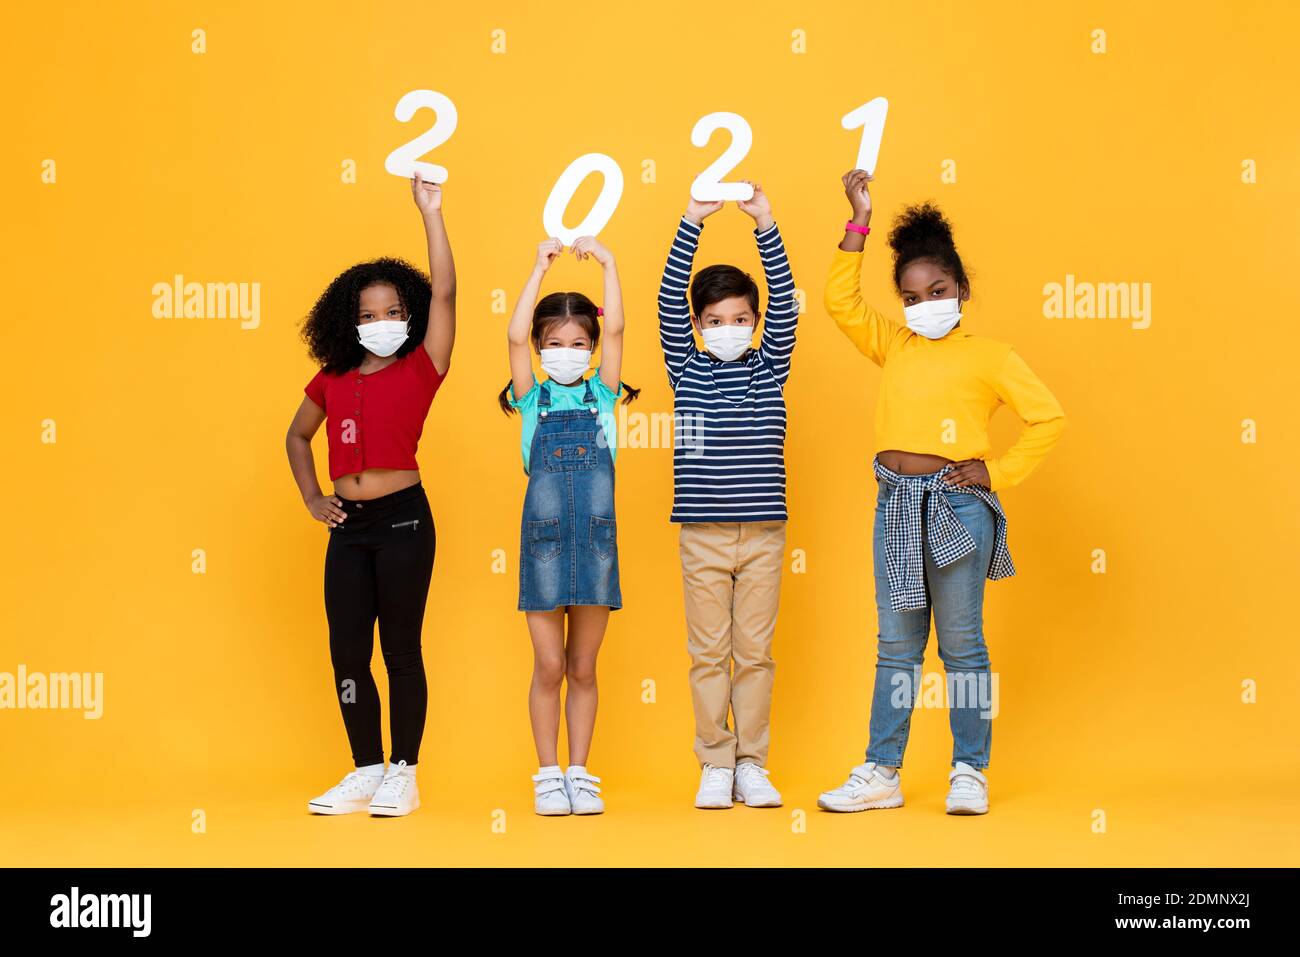 Cute mixed race children wearing medical face masks holding 2021 numbers isolated on yellow background, new year in the time of pandemic concepts Stock Photo